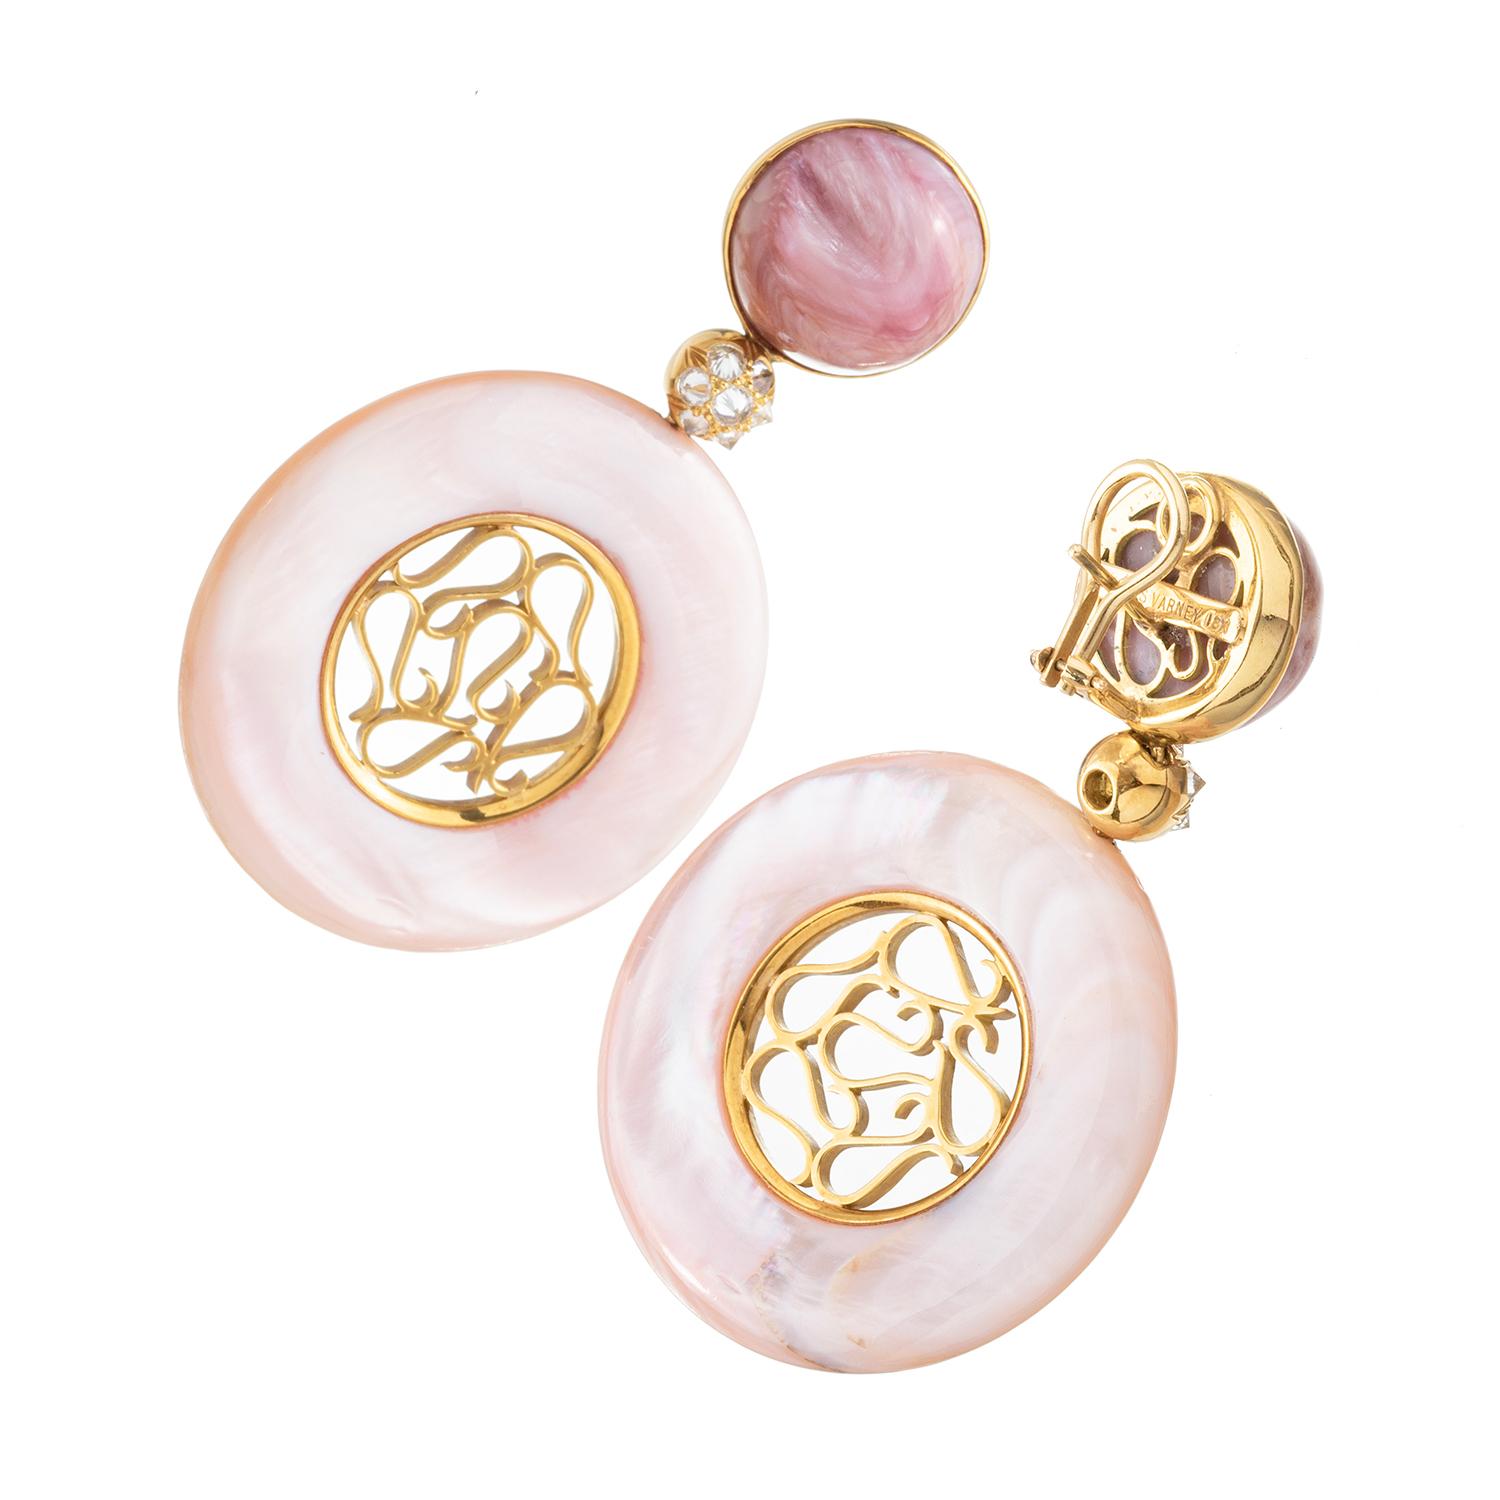 These Nicholas Varney long pendant earrings feature circular-shaped pink mother-of pearl drops each centering an openwork organic lattice design in 18k yellow gold.  The drops are suspended from round cabochon rose quartz tops with natural parting